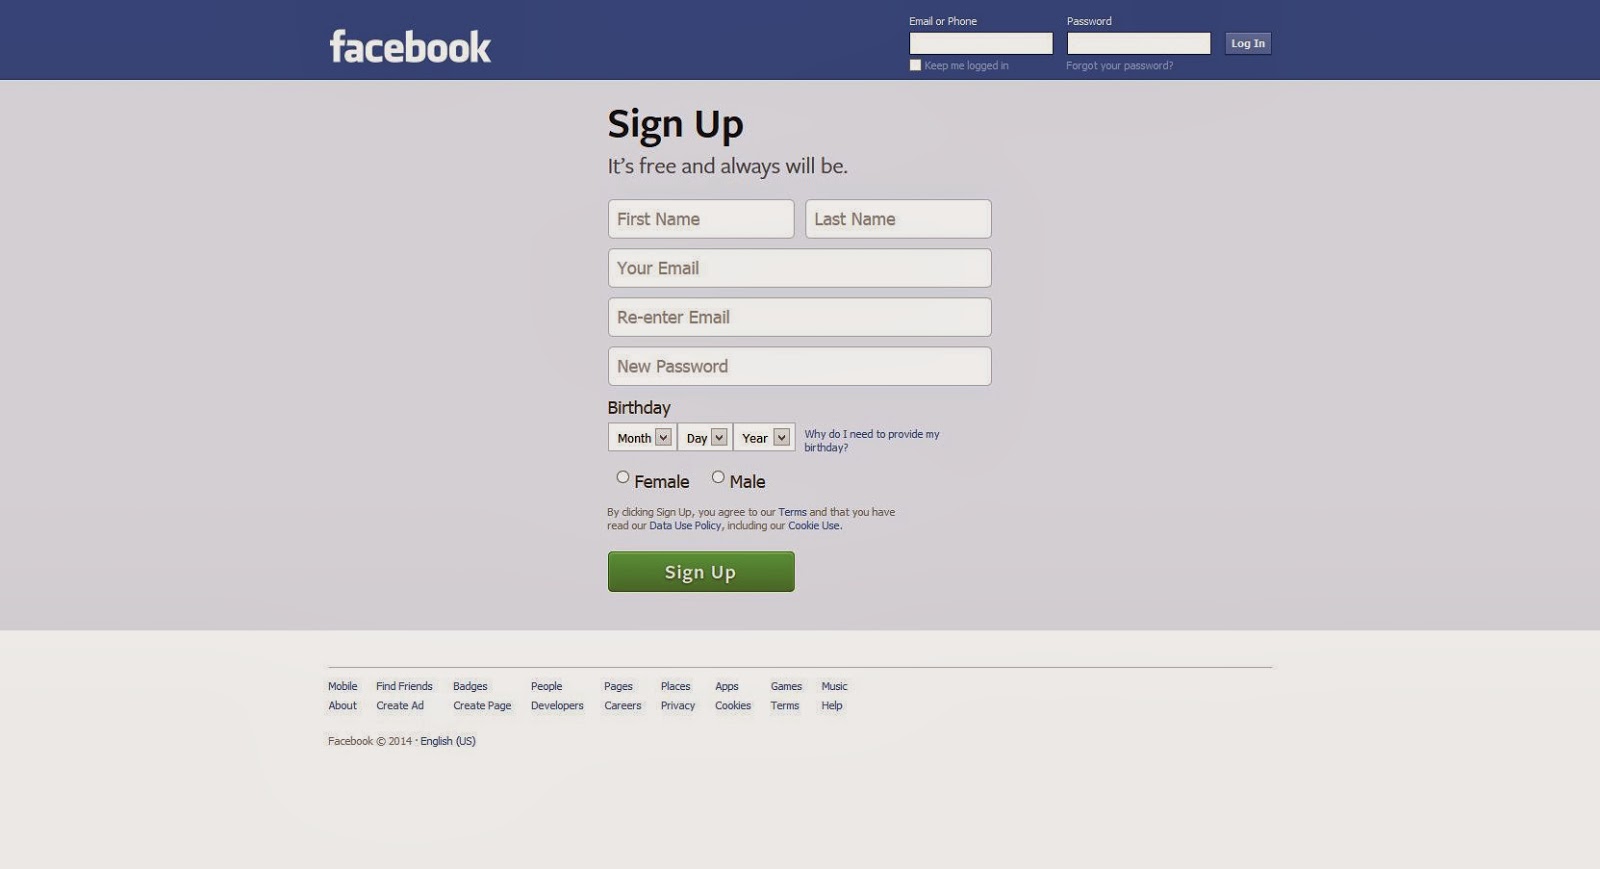 Welcome to Facebook - Log In, Sign Up or Learn More